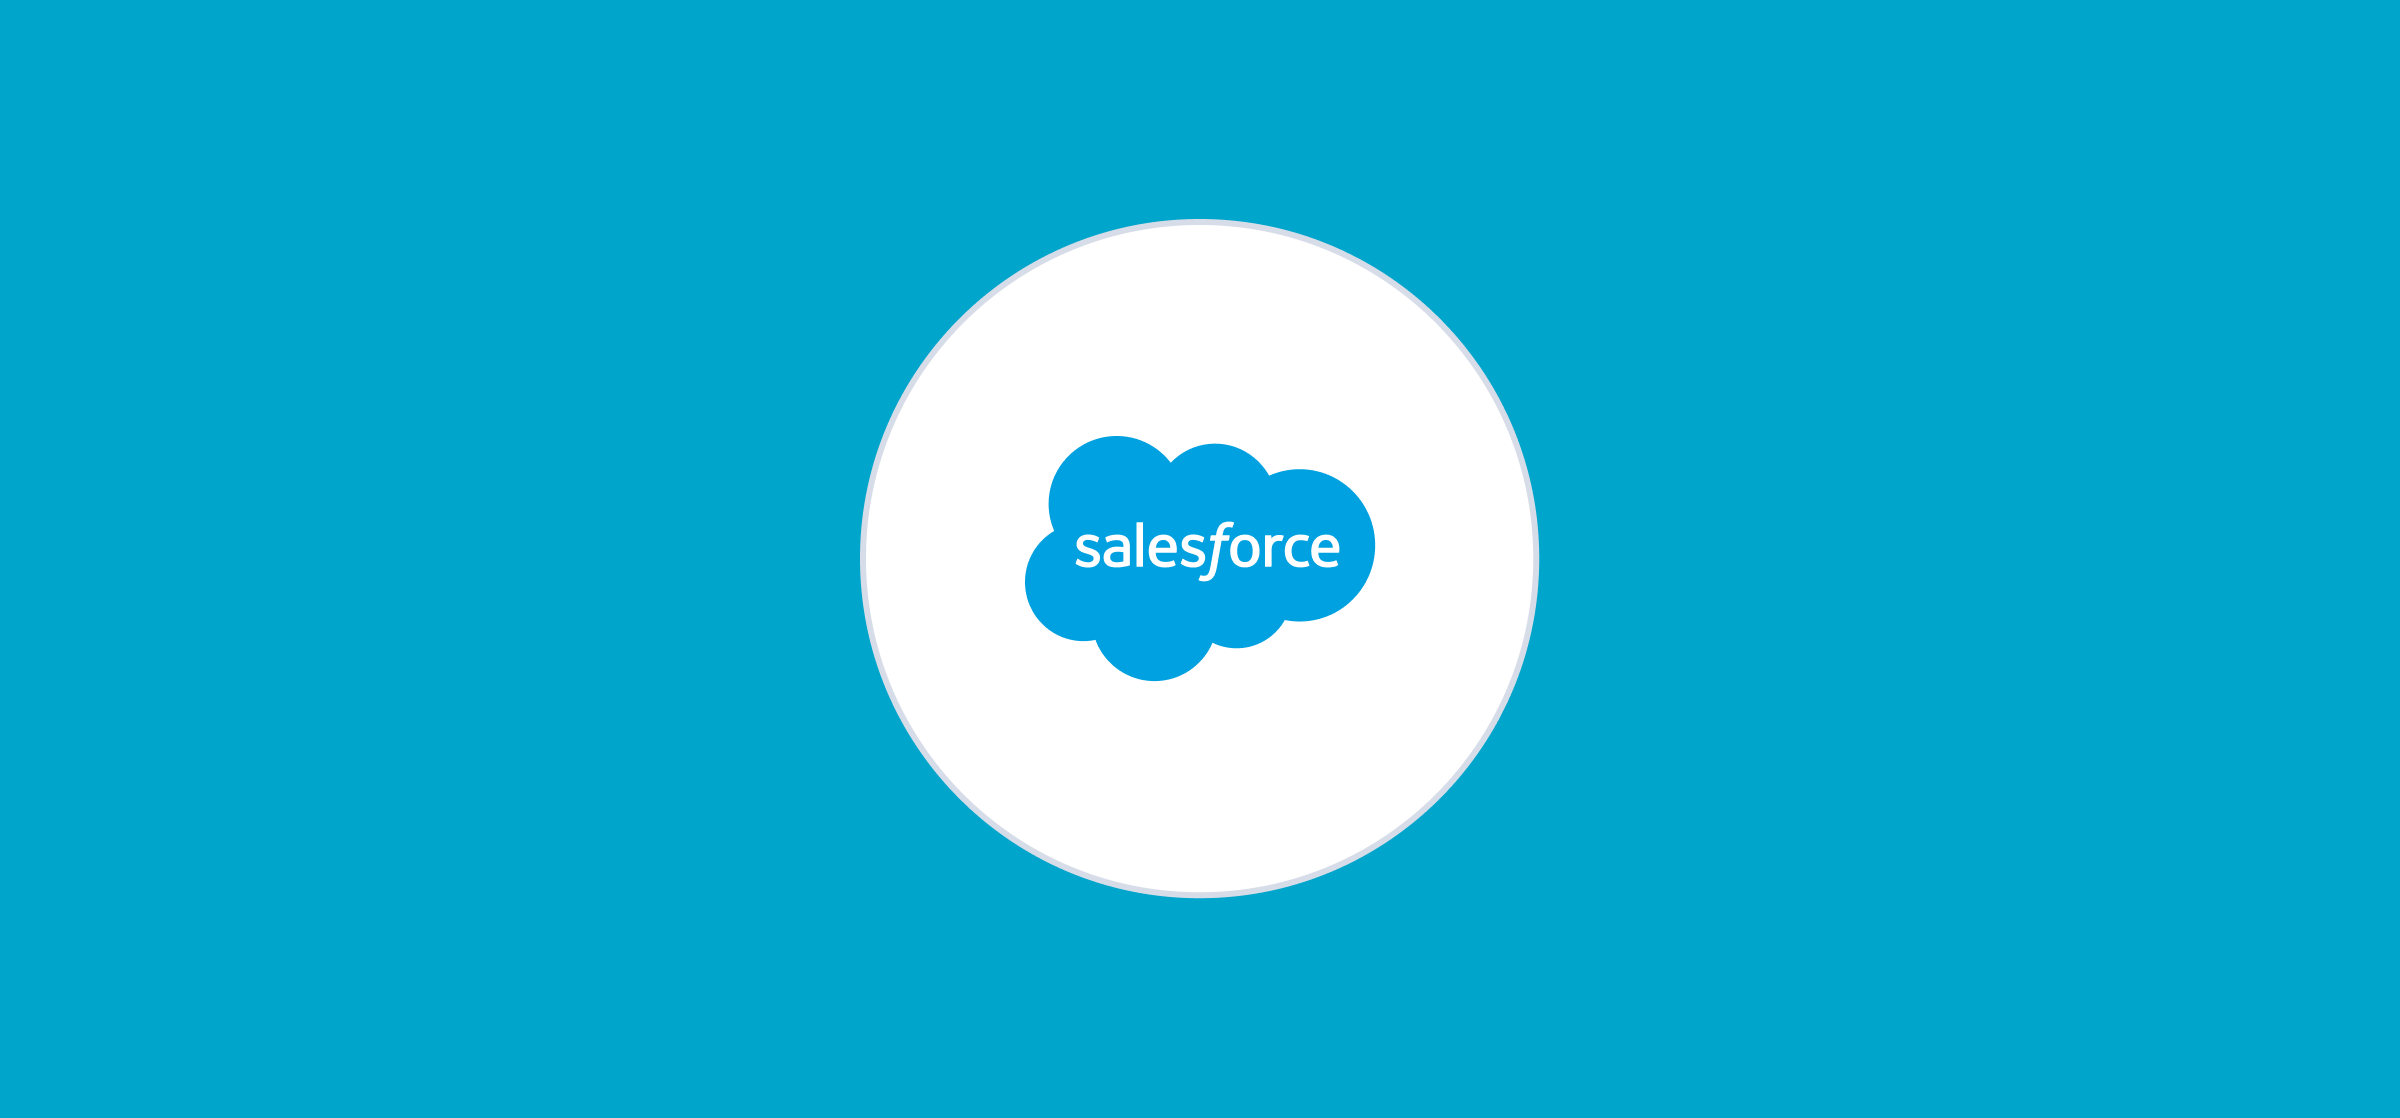 A logo for Salesforce, representing a guide to Salesforce contacts.